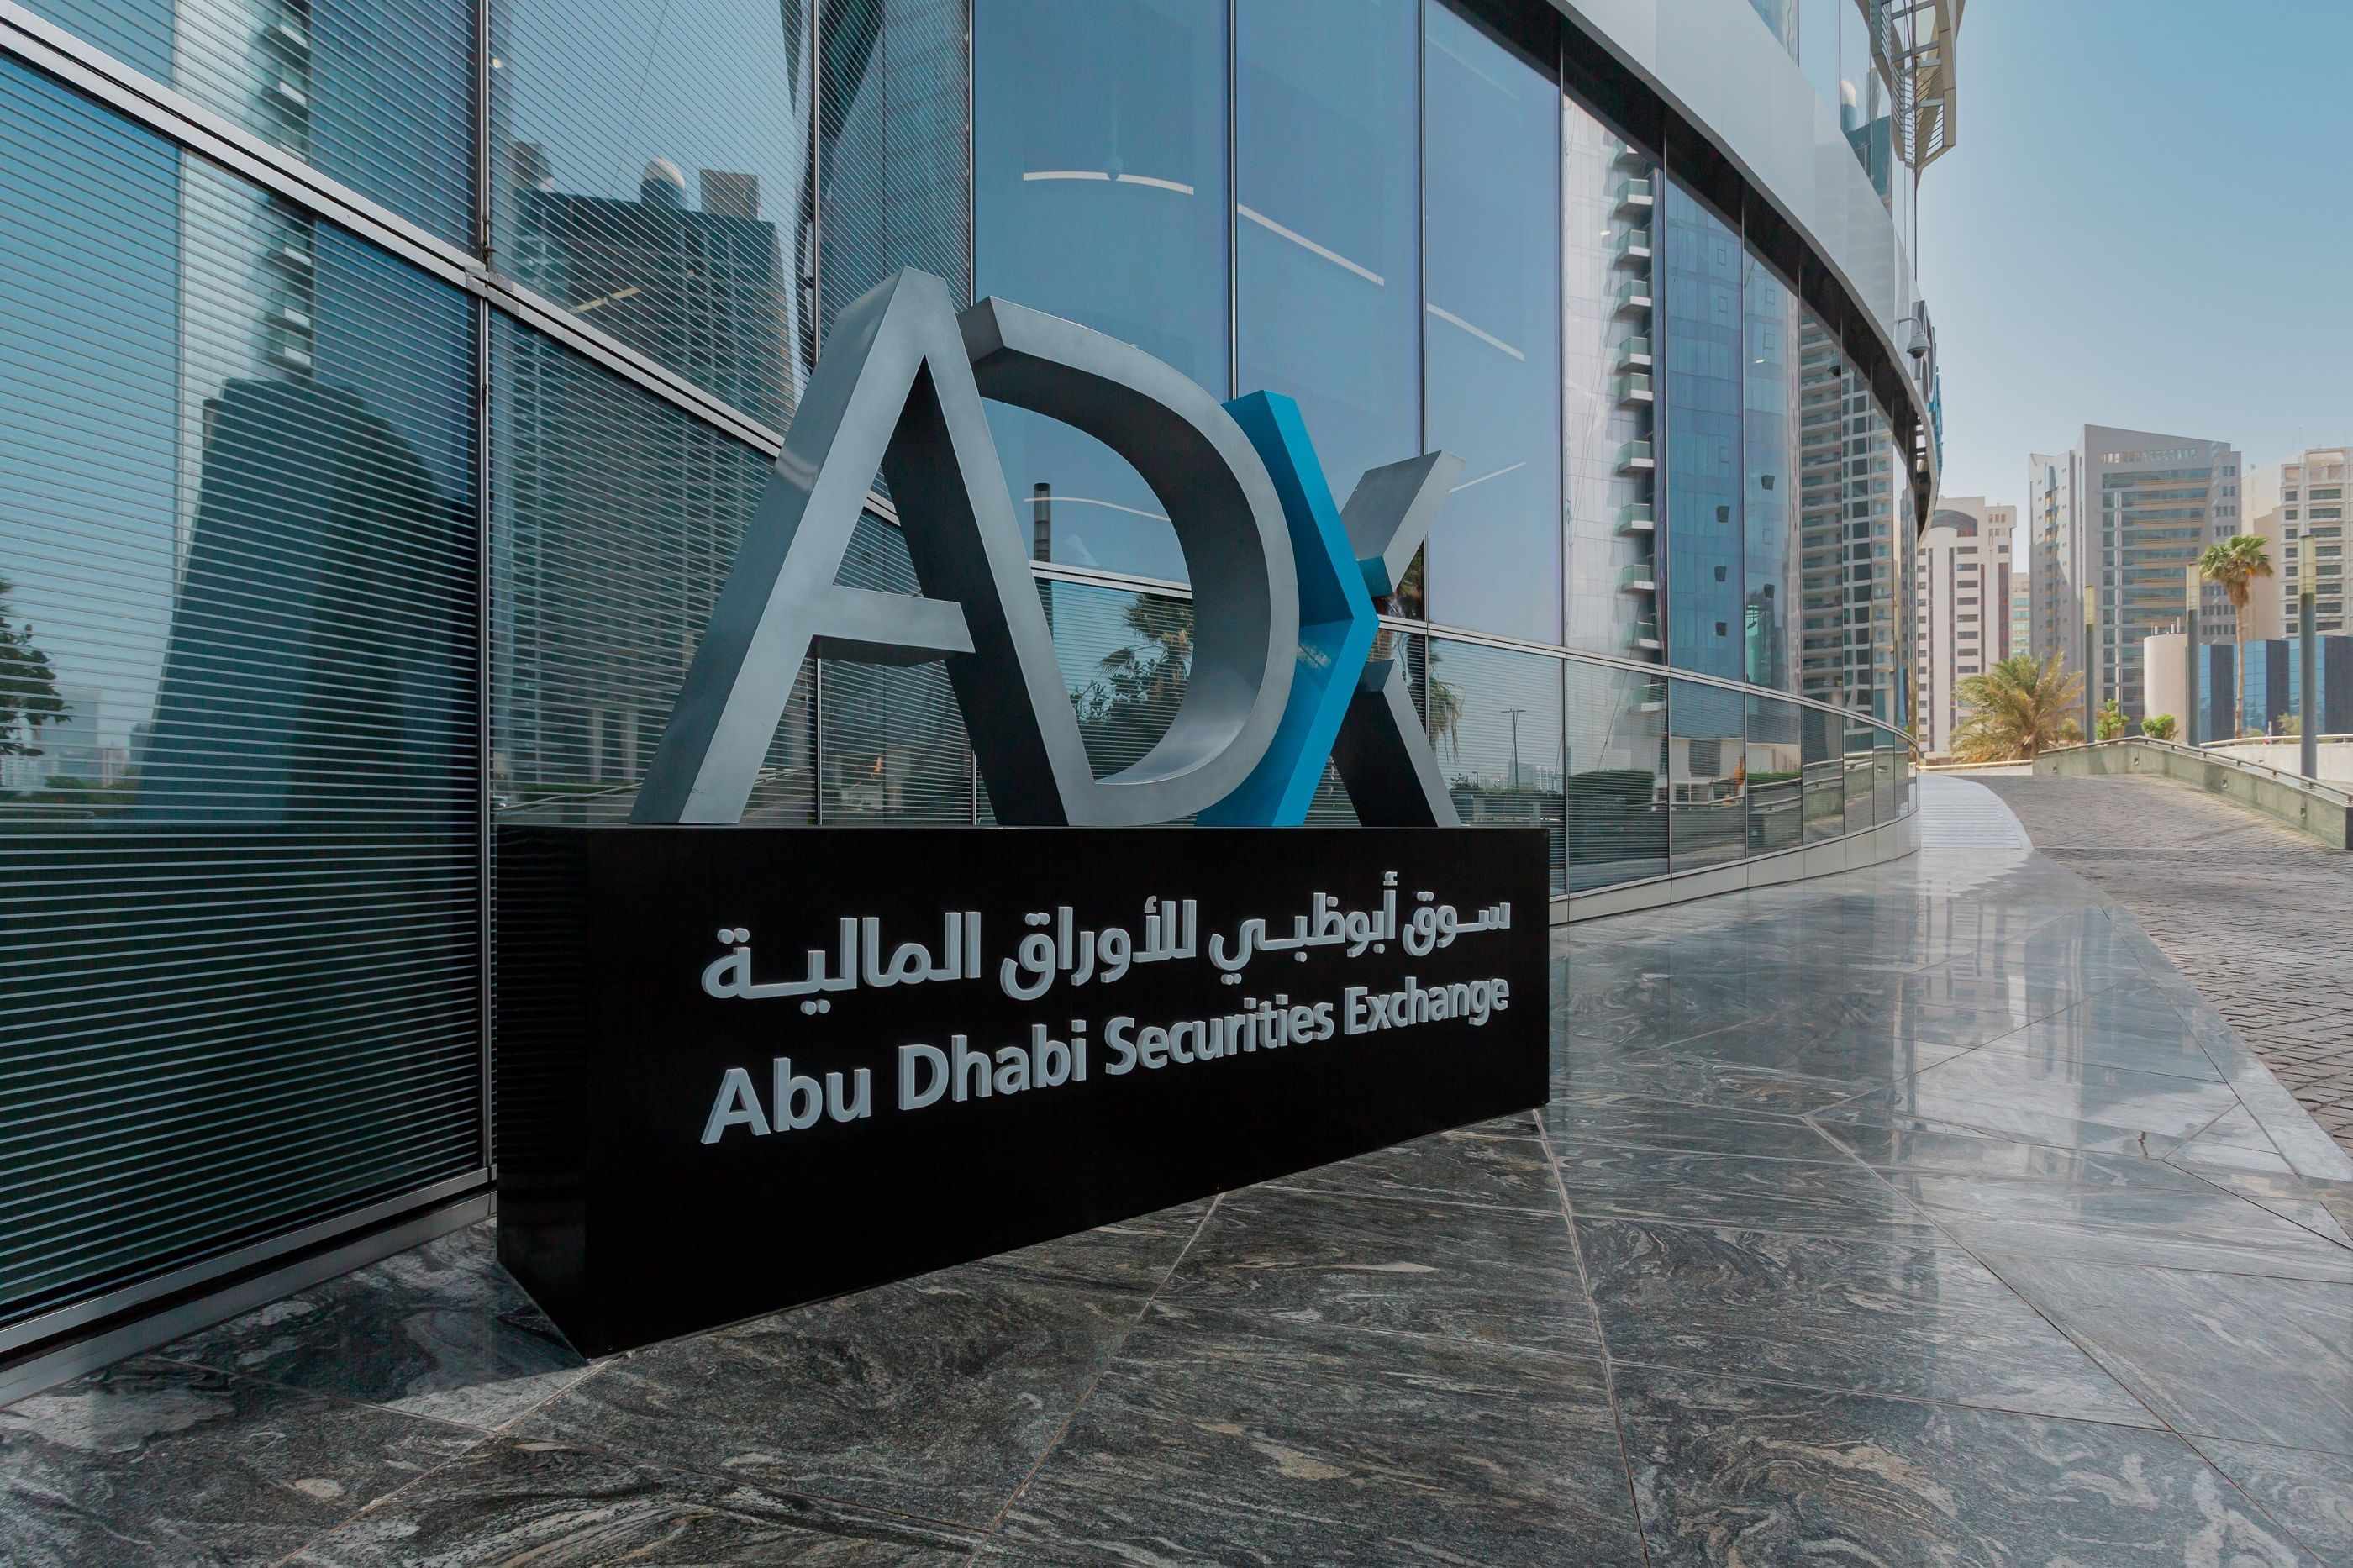 adnoc,shares,adx,worth,transactions